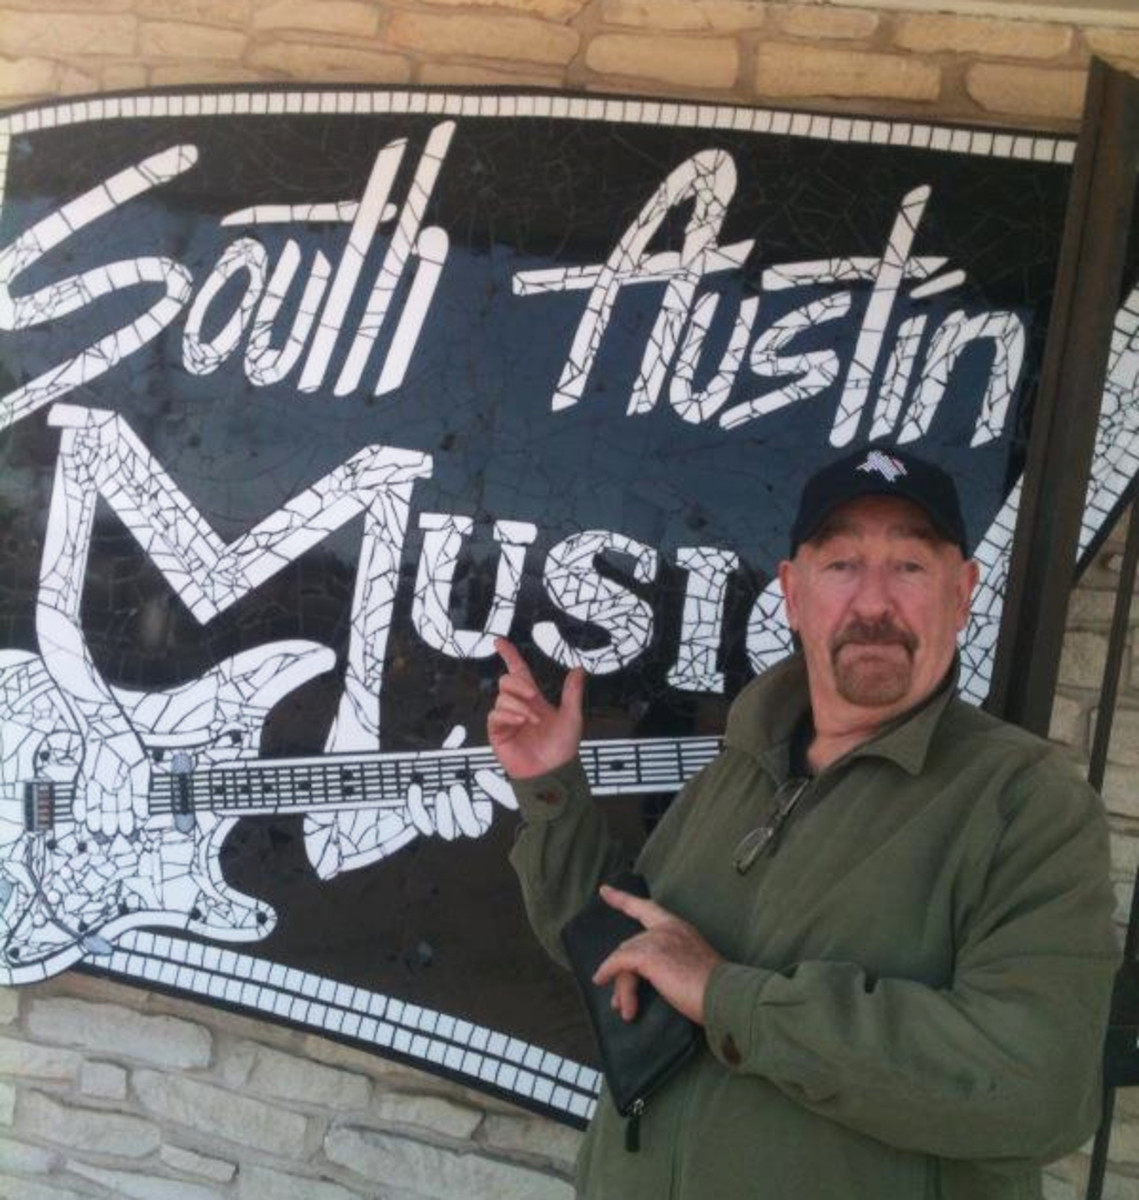 Dave Mason in front of South Austin Music outdoor sign on Wedi board